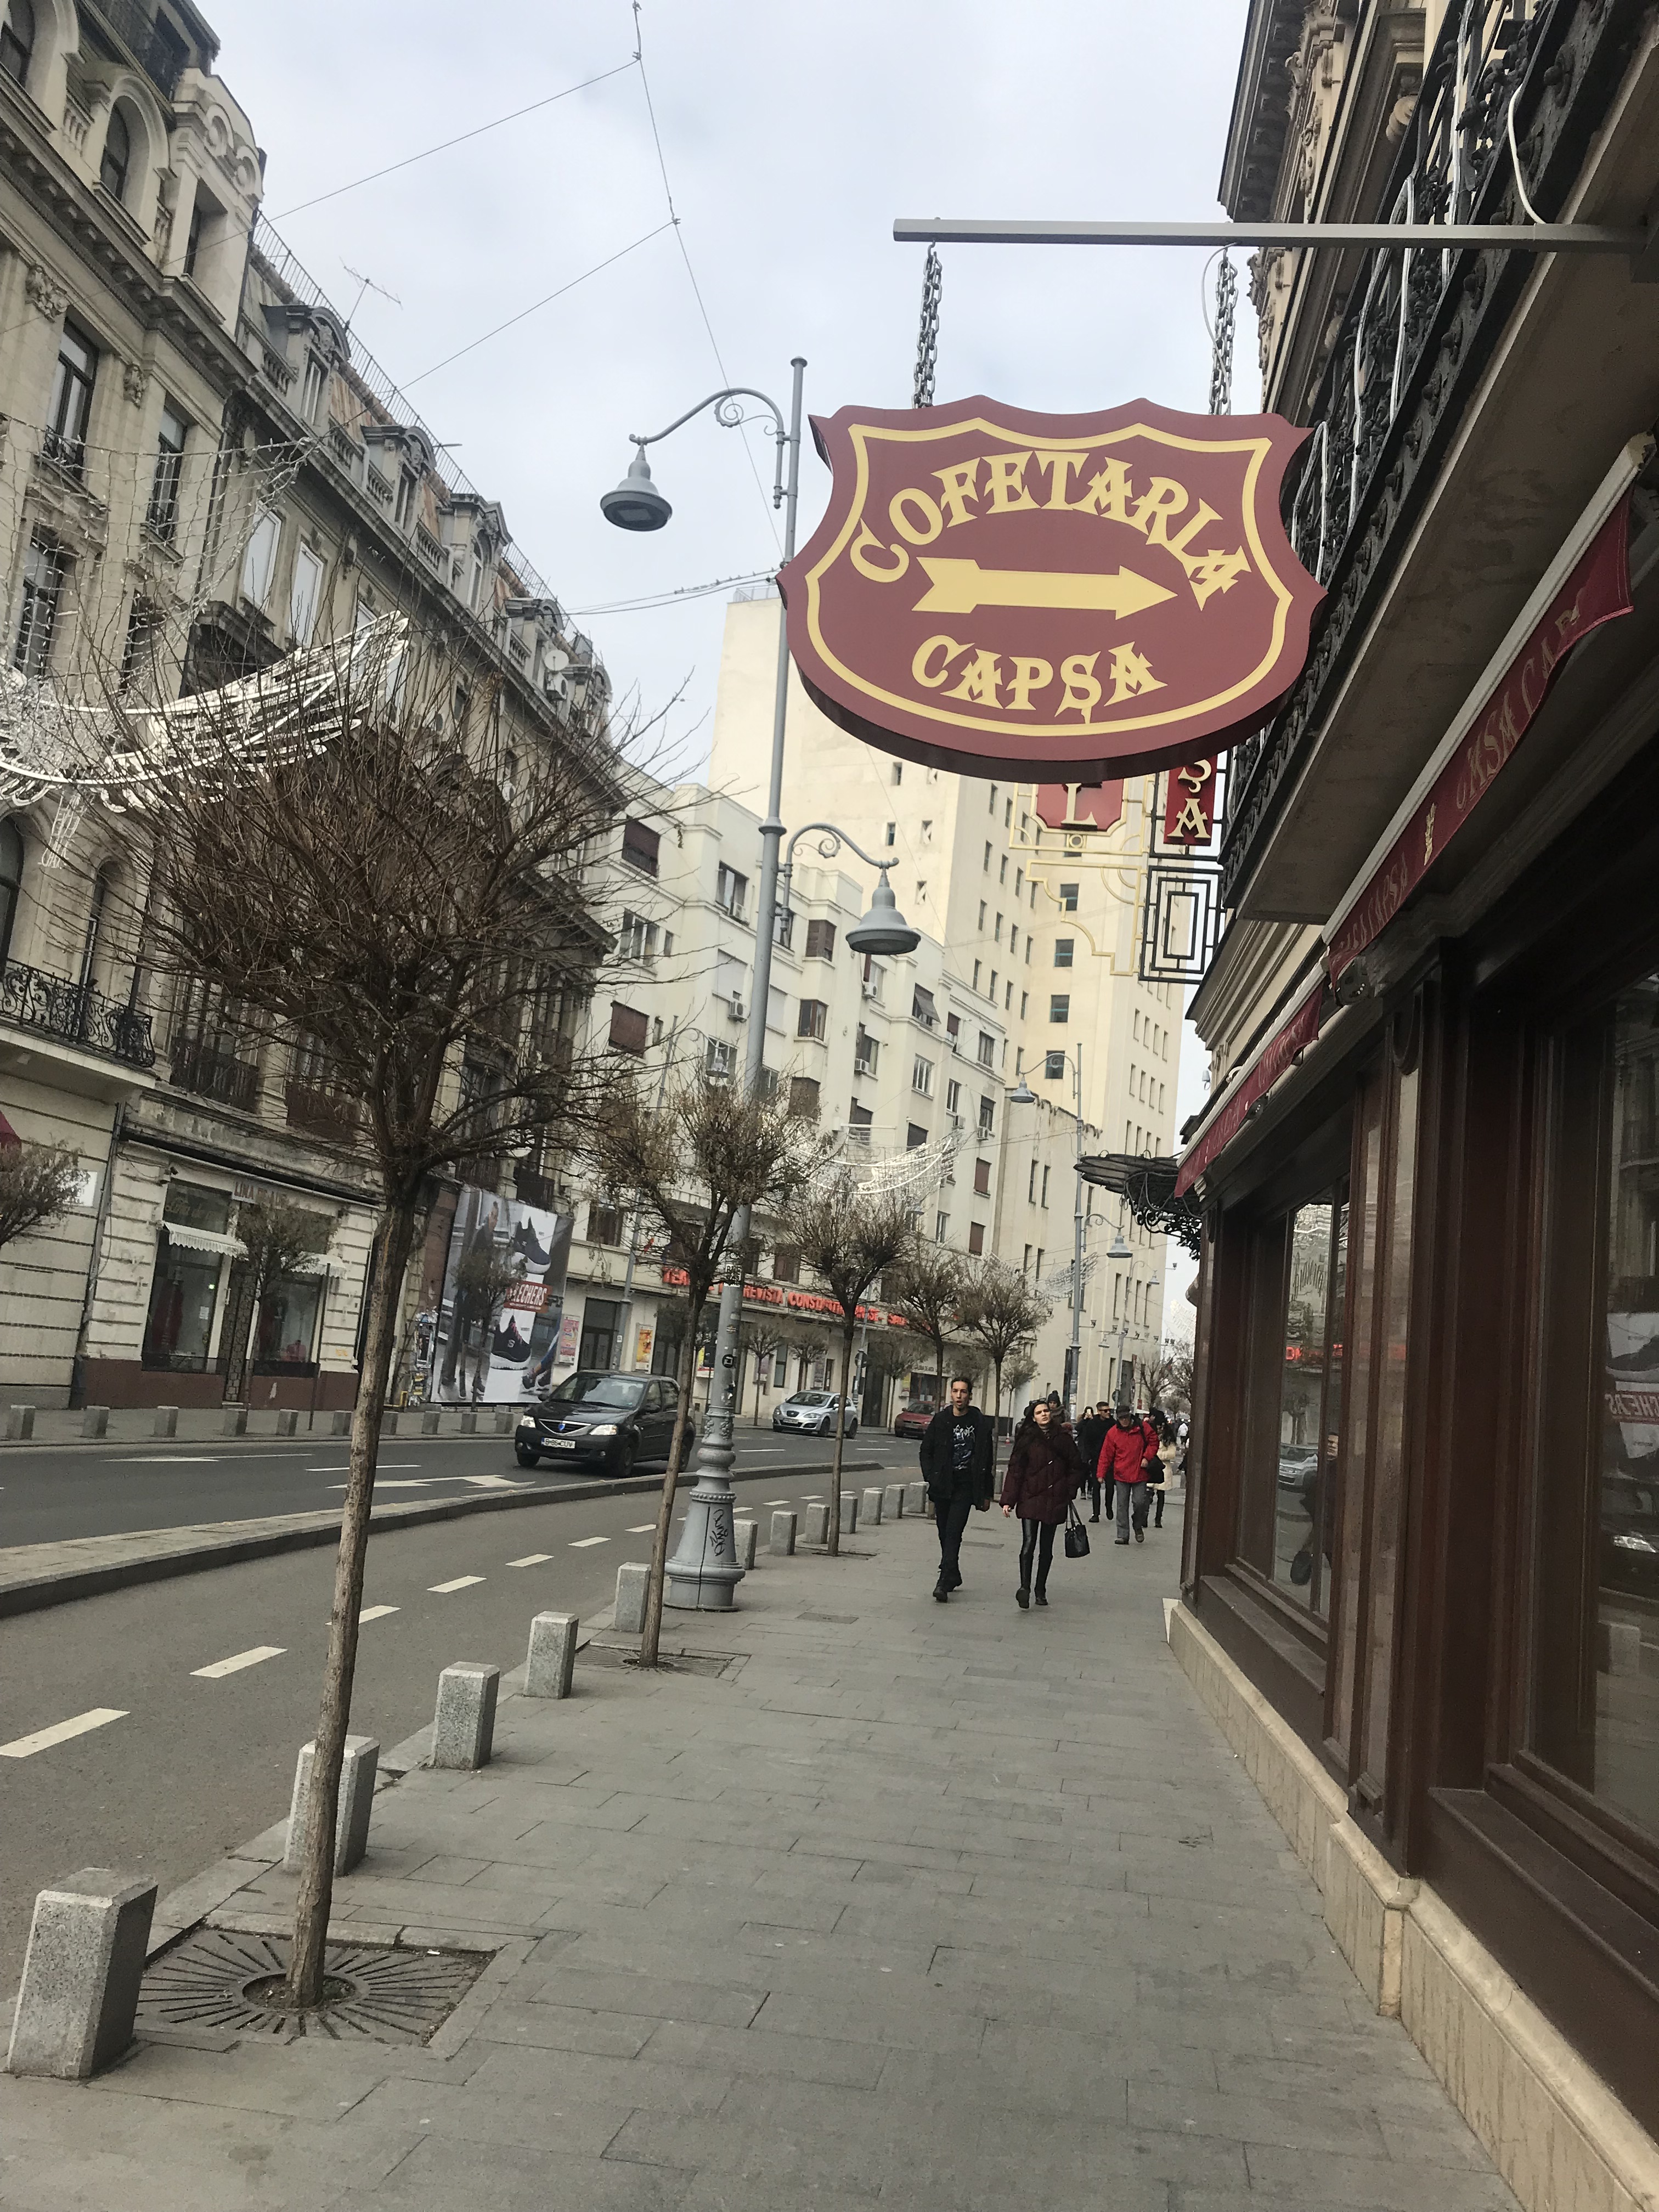 Adept I'm sorry Messy Lesser Known Sights in Bucharest - Cofetaria Capsa - The Millennial Runaway  - A Travel Blog for Busy Millennials